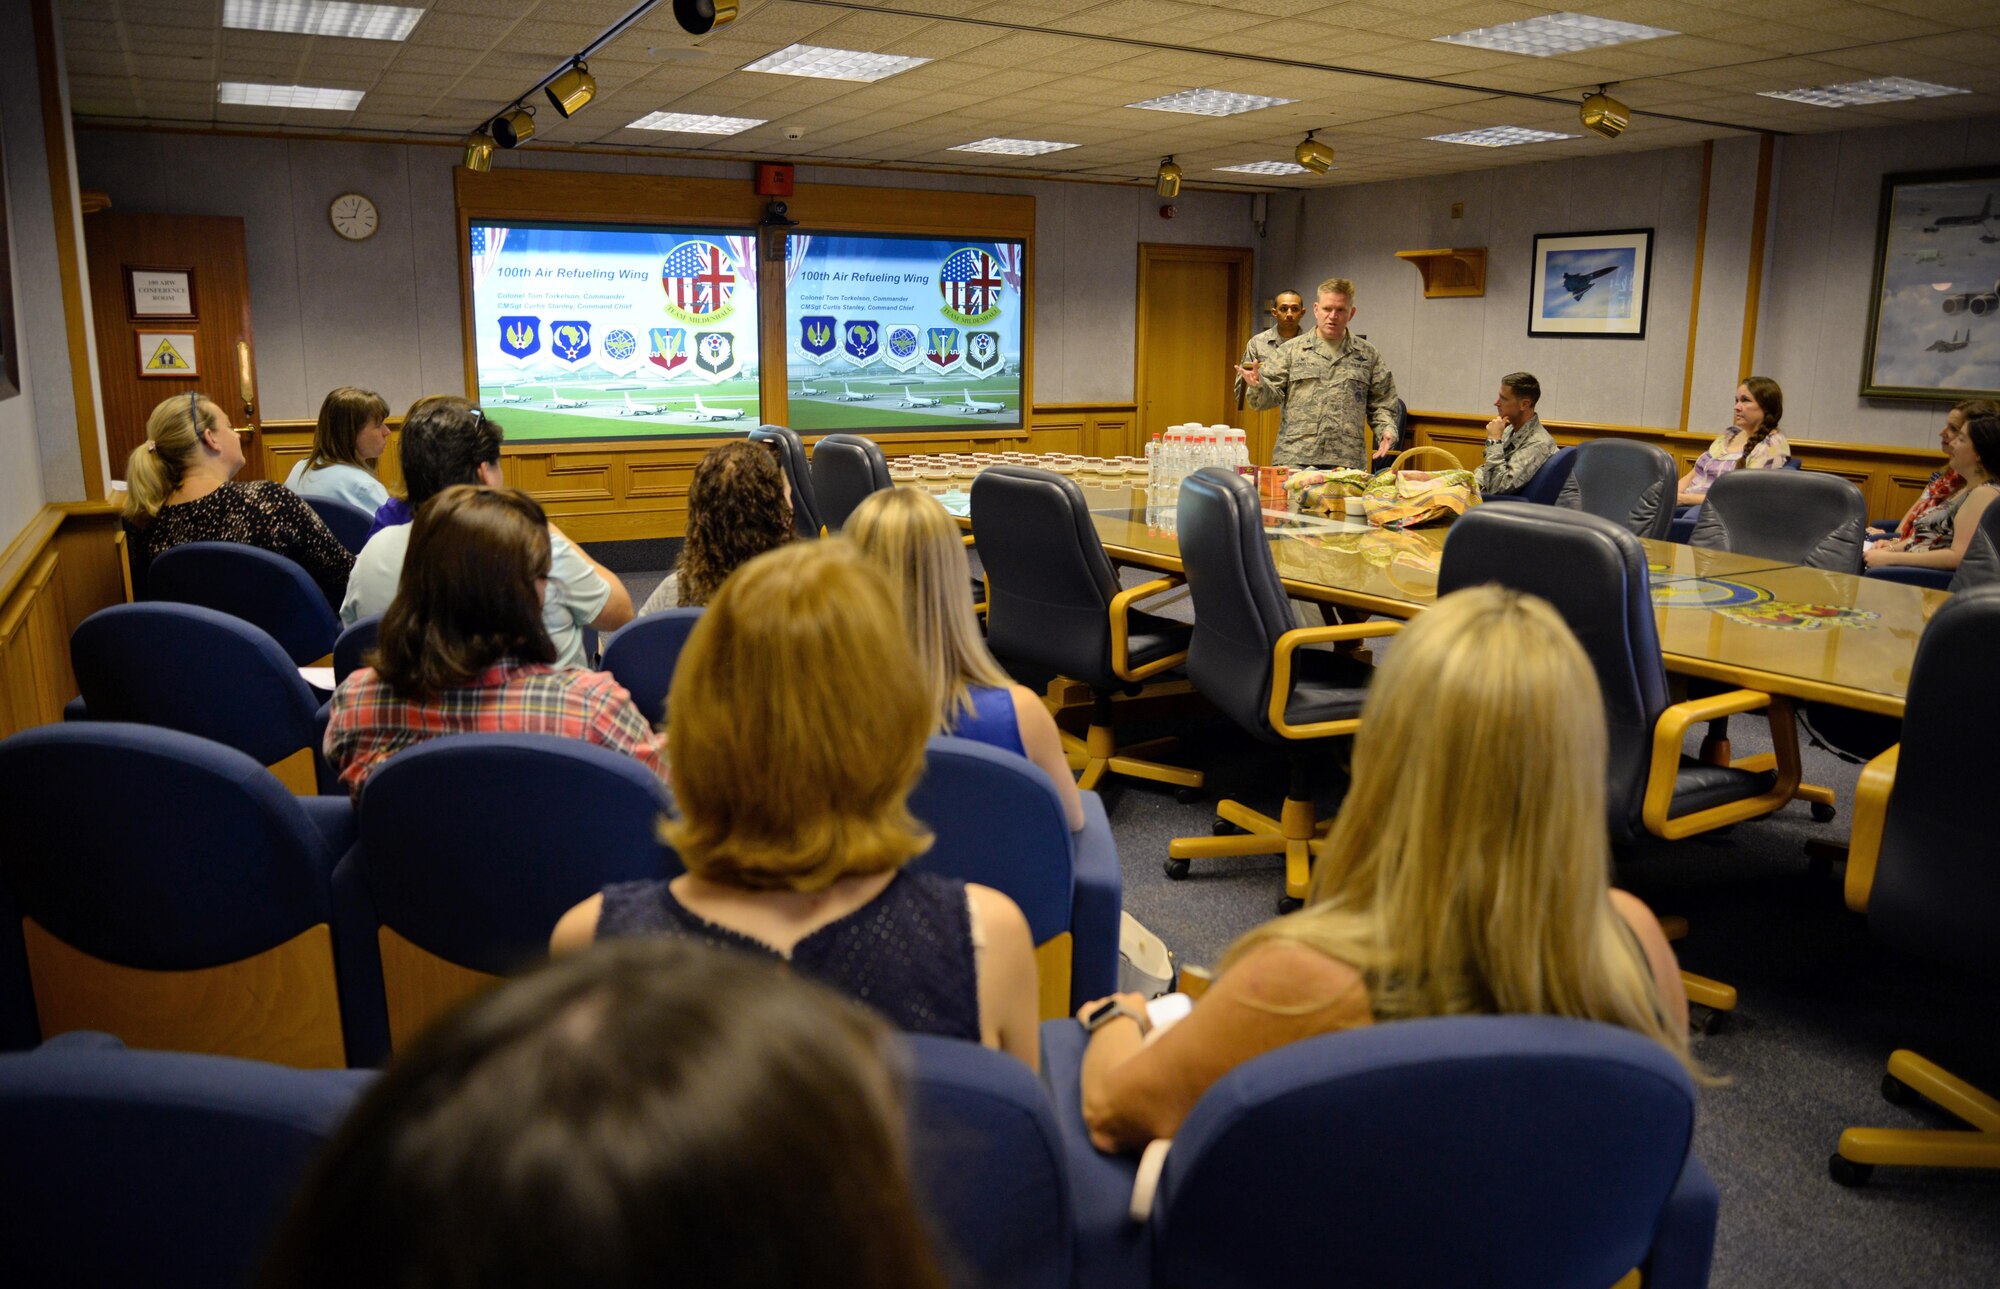 U.S. Air Force Col. Thomas D. Torkelson, 100th Air Refueling Wing commander, briefs the wing’s mission to Team Mildenhall spouses Sept. 8, 2016, on RAF Mildenhall, England. The Spouse Immersion Tour gave Team Mildenhall spouses an opportunity to network and gain a better understanding of programs and facilities on base. (U.S. Air Force photo by Senior Airman Christine Halan)